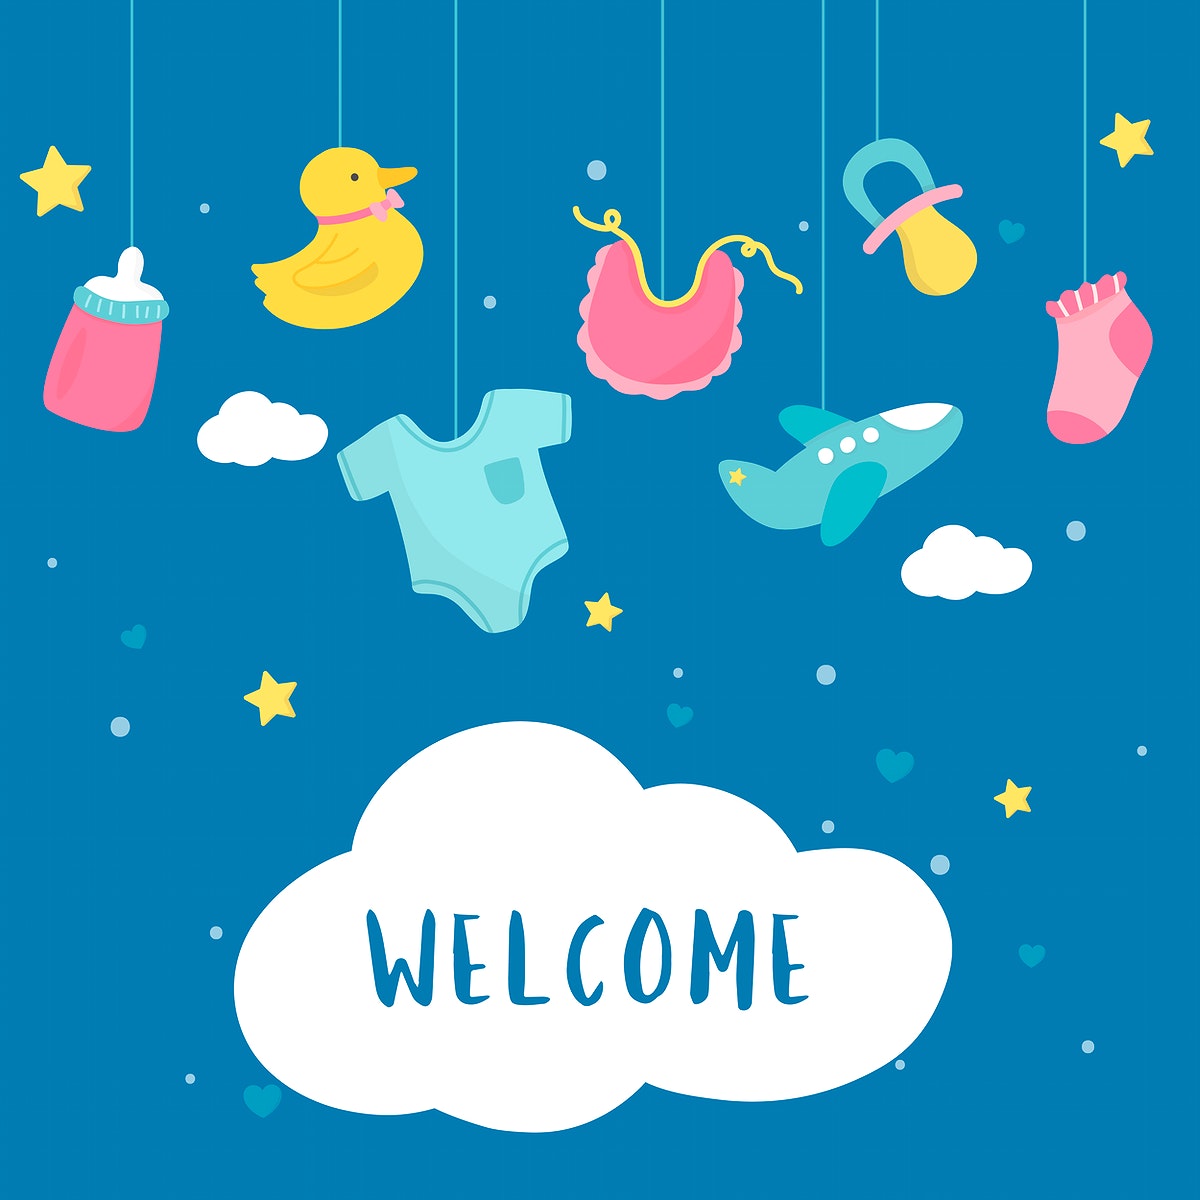 Welcome Baby Boy Image Wallpaper